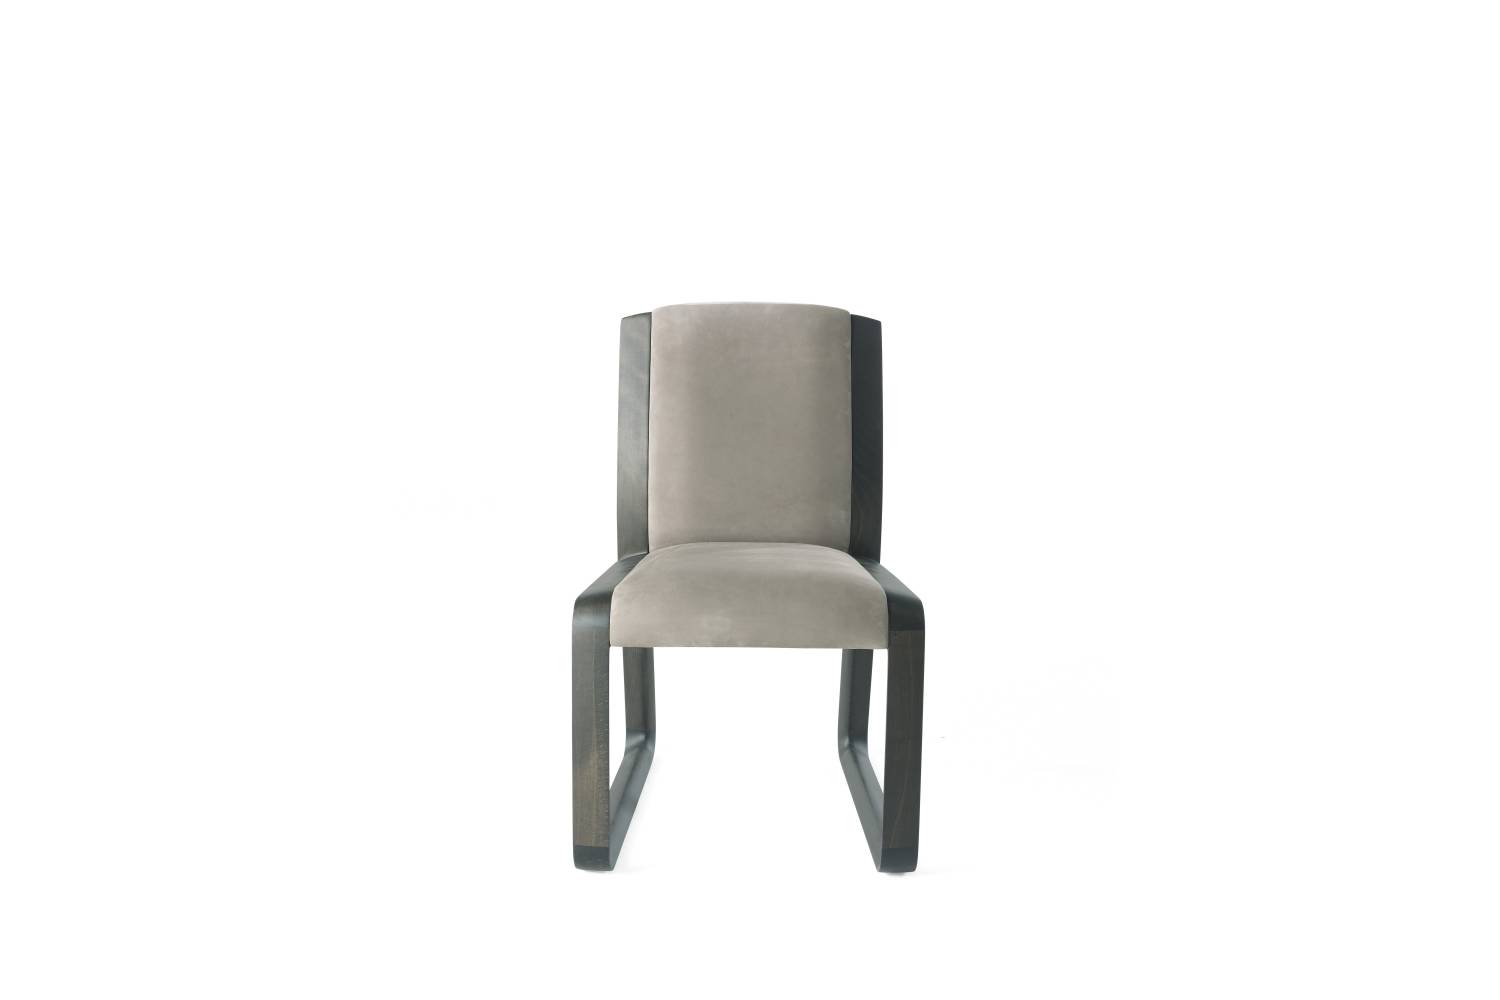 WYNWOOD - chair - chair with armrests | Gianfranco Ferré Home Interiors